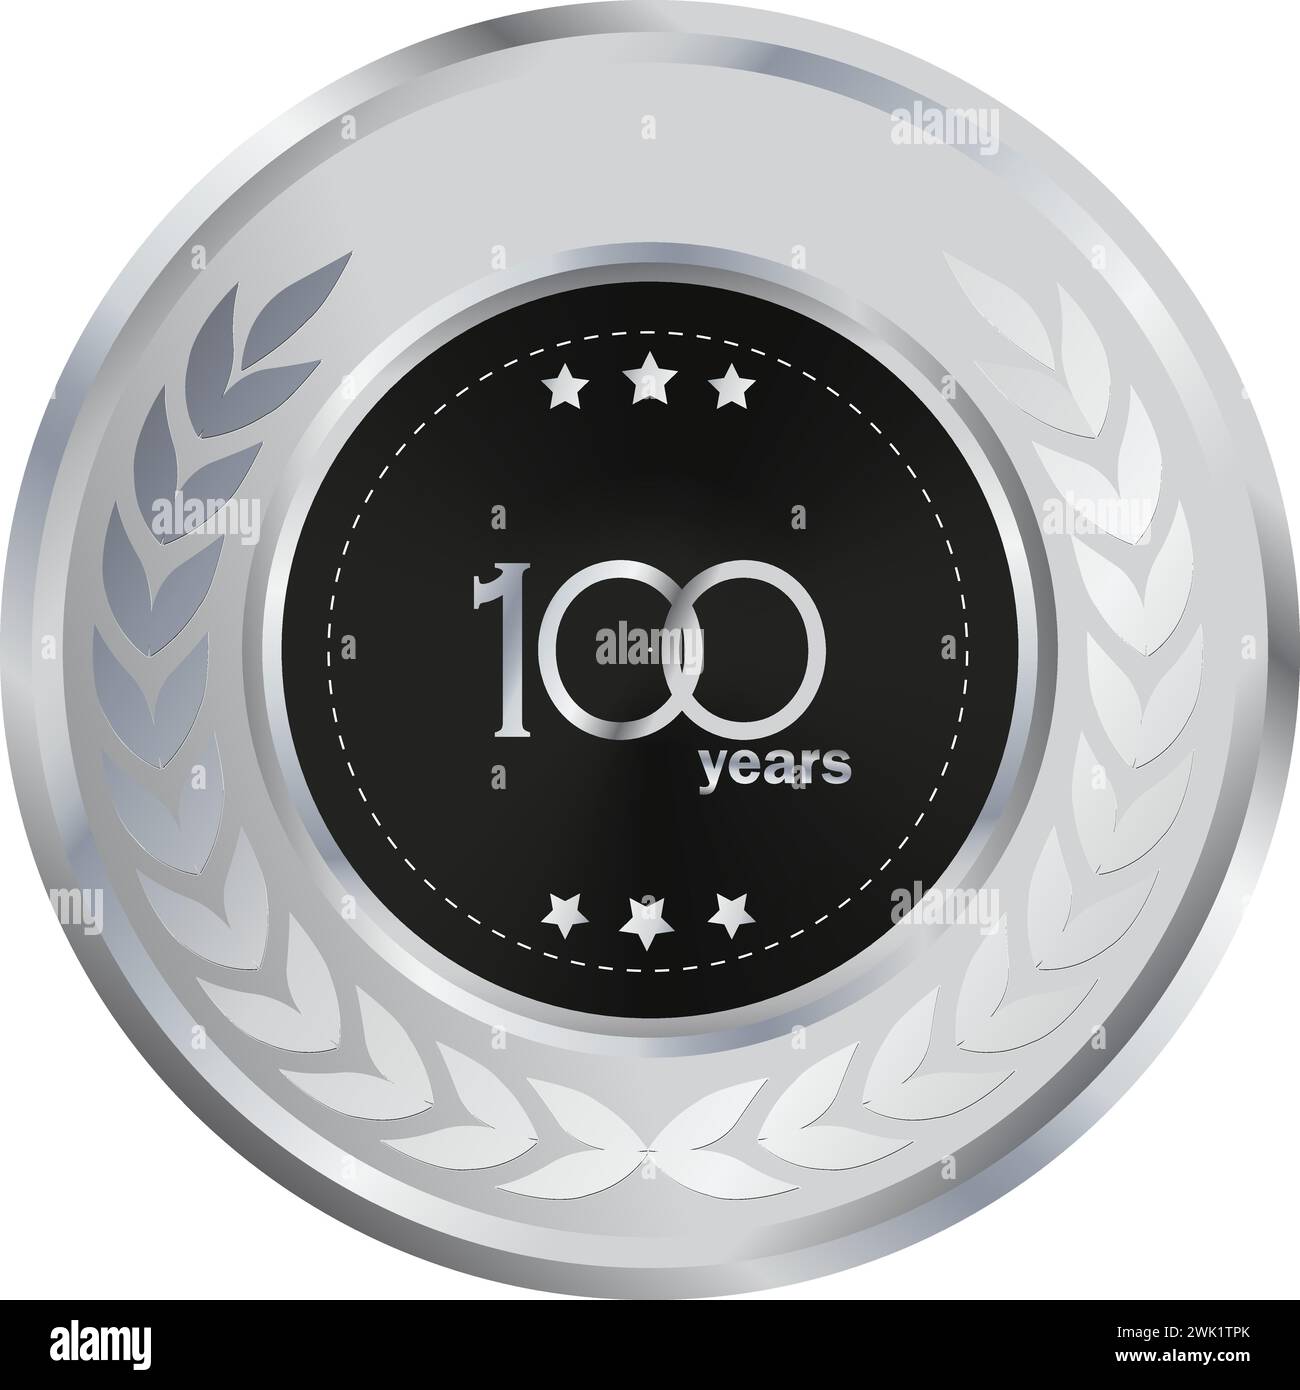 100th anniversary in Silver and Black, anniversary gift, 100th Year Anniversary Celebrating, Silver seal, Silver ring, birthday celebration Stock Vector